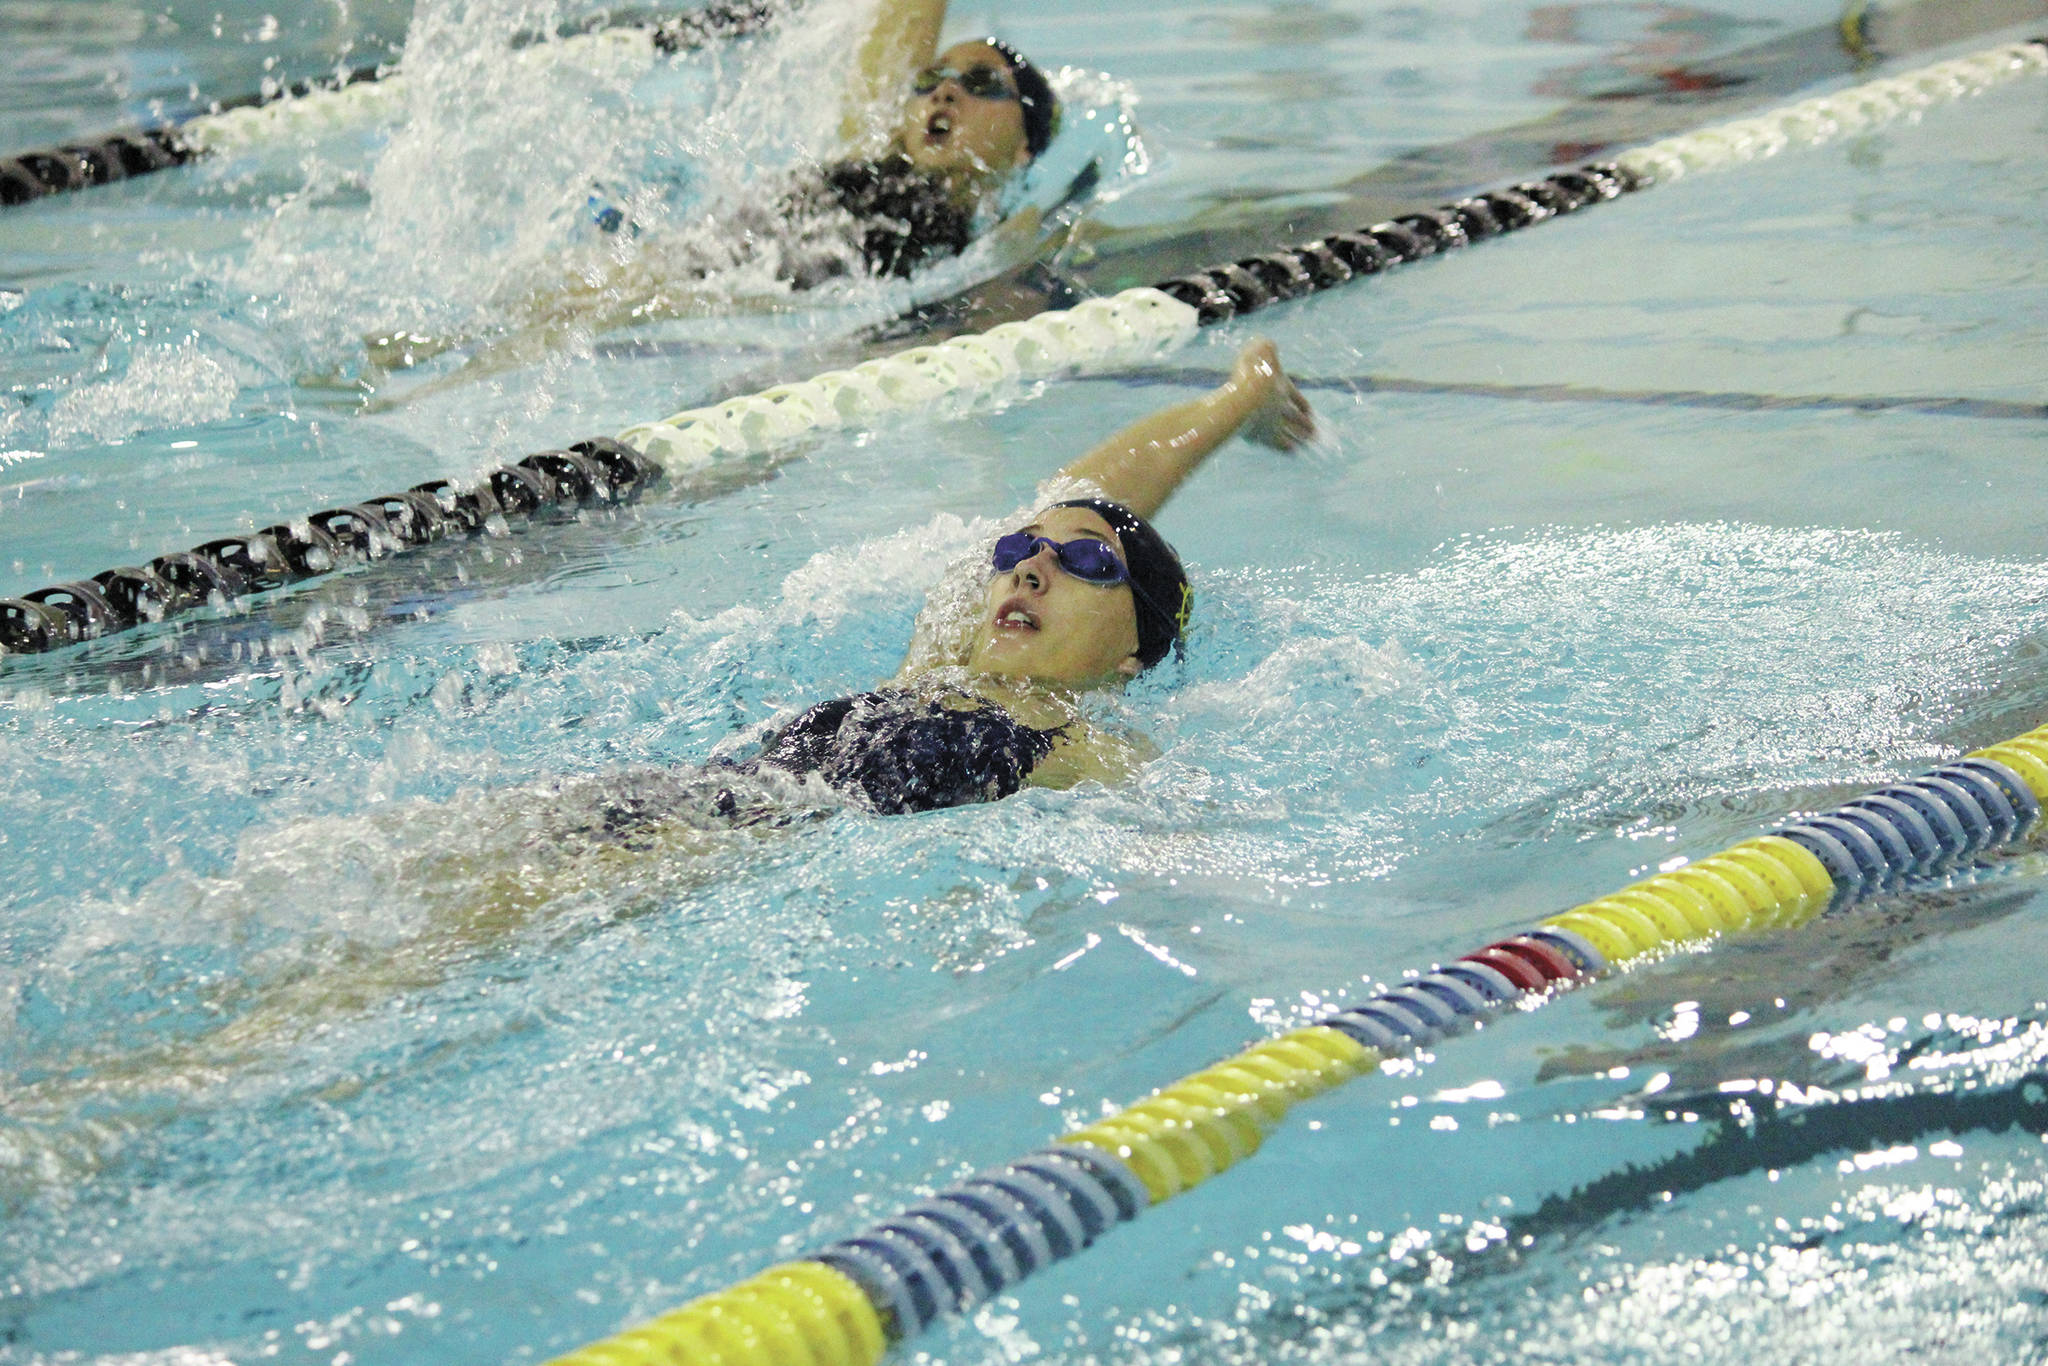 Homer’s Delta Fabich and Madison Story (upper left) compete in the girls 100 yard backstroke Friday, Oct. 2, 2020 during a dual meet against Seward High School at the Kate Kuhns Aquatic Center in Homer, Alaska. (Photo by Megan Pacer/Homer News)